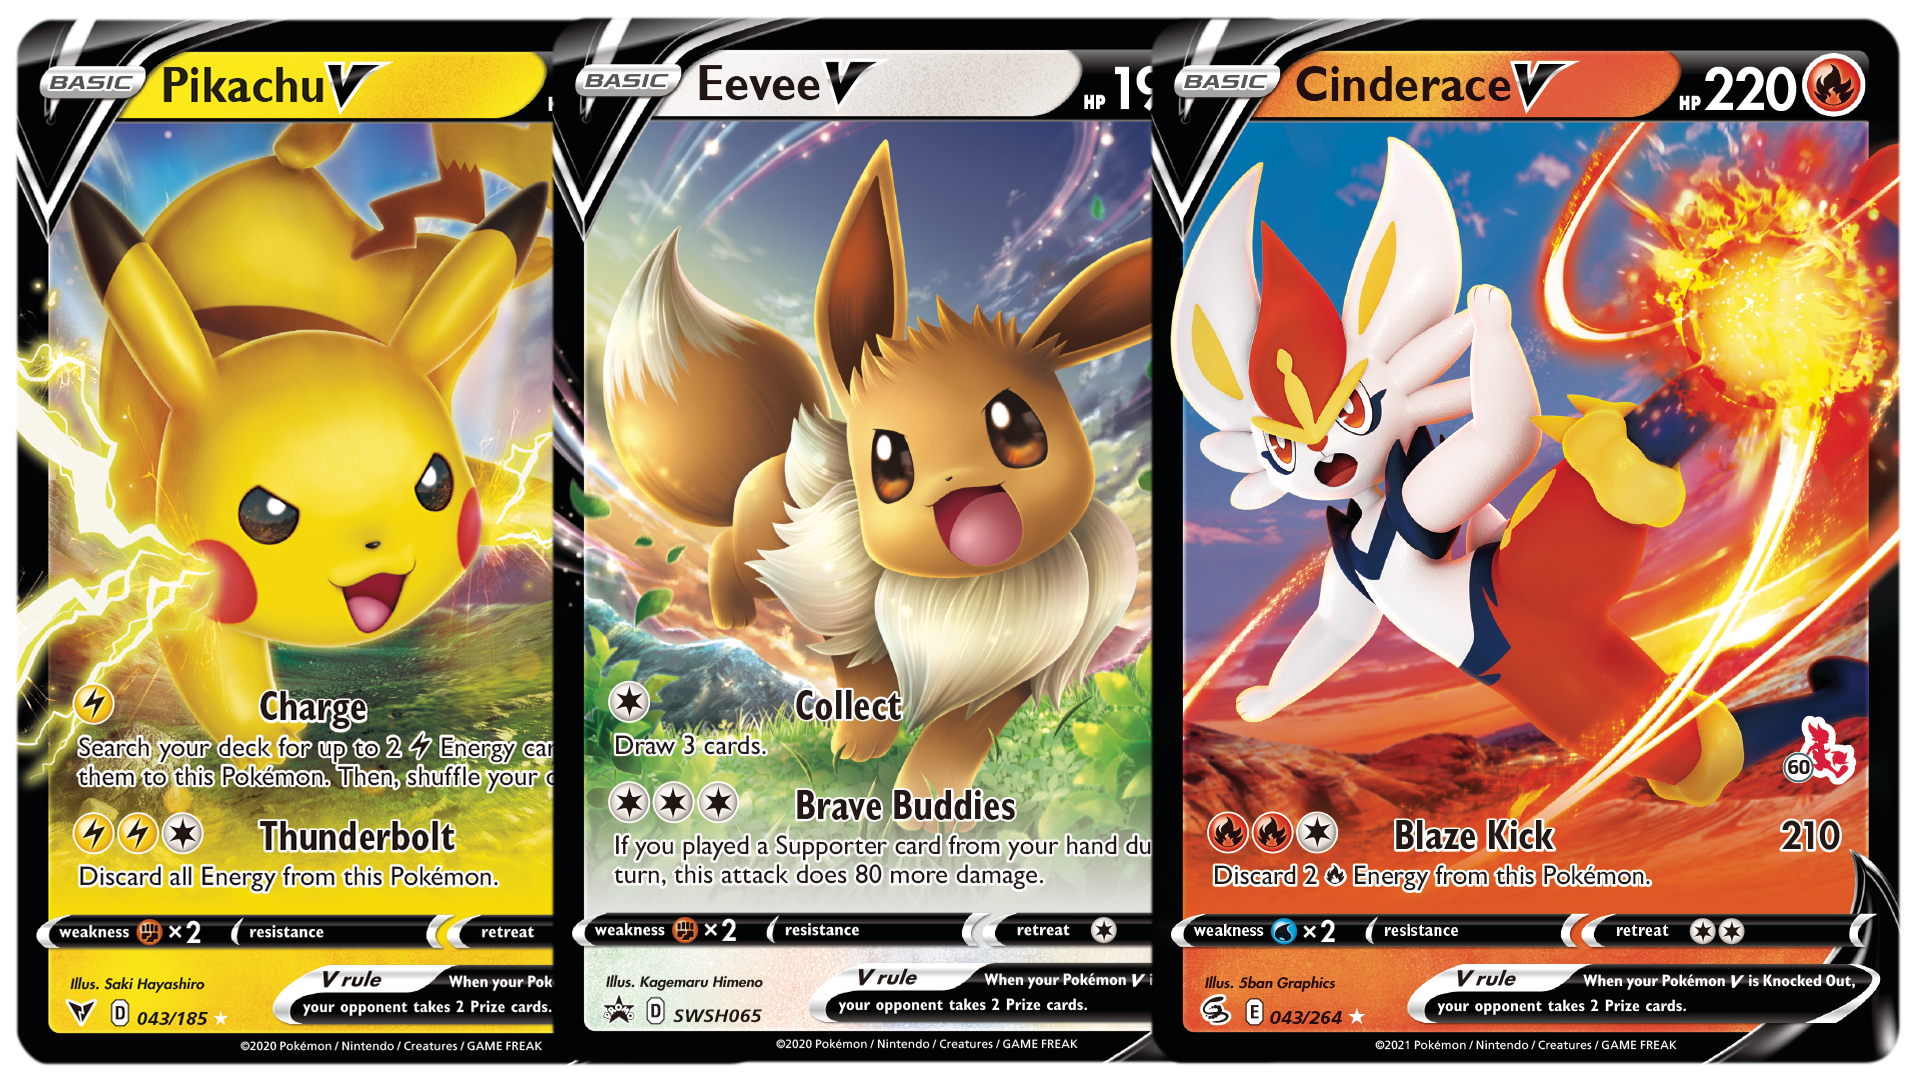 Image for Pokémon TCG’s Battle Academy box gets a 2022 update with Pikachu, Eevee and Cinderace decks and Pokémon V cards